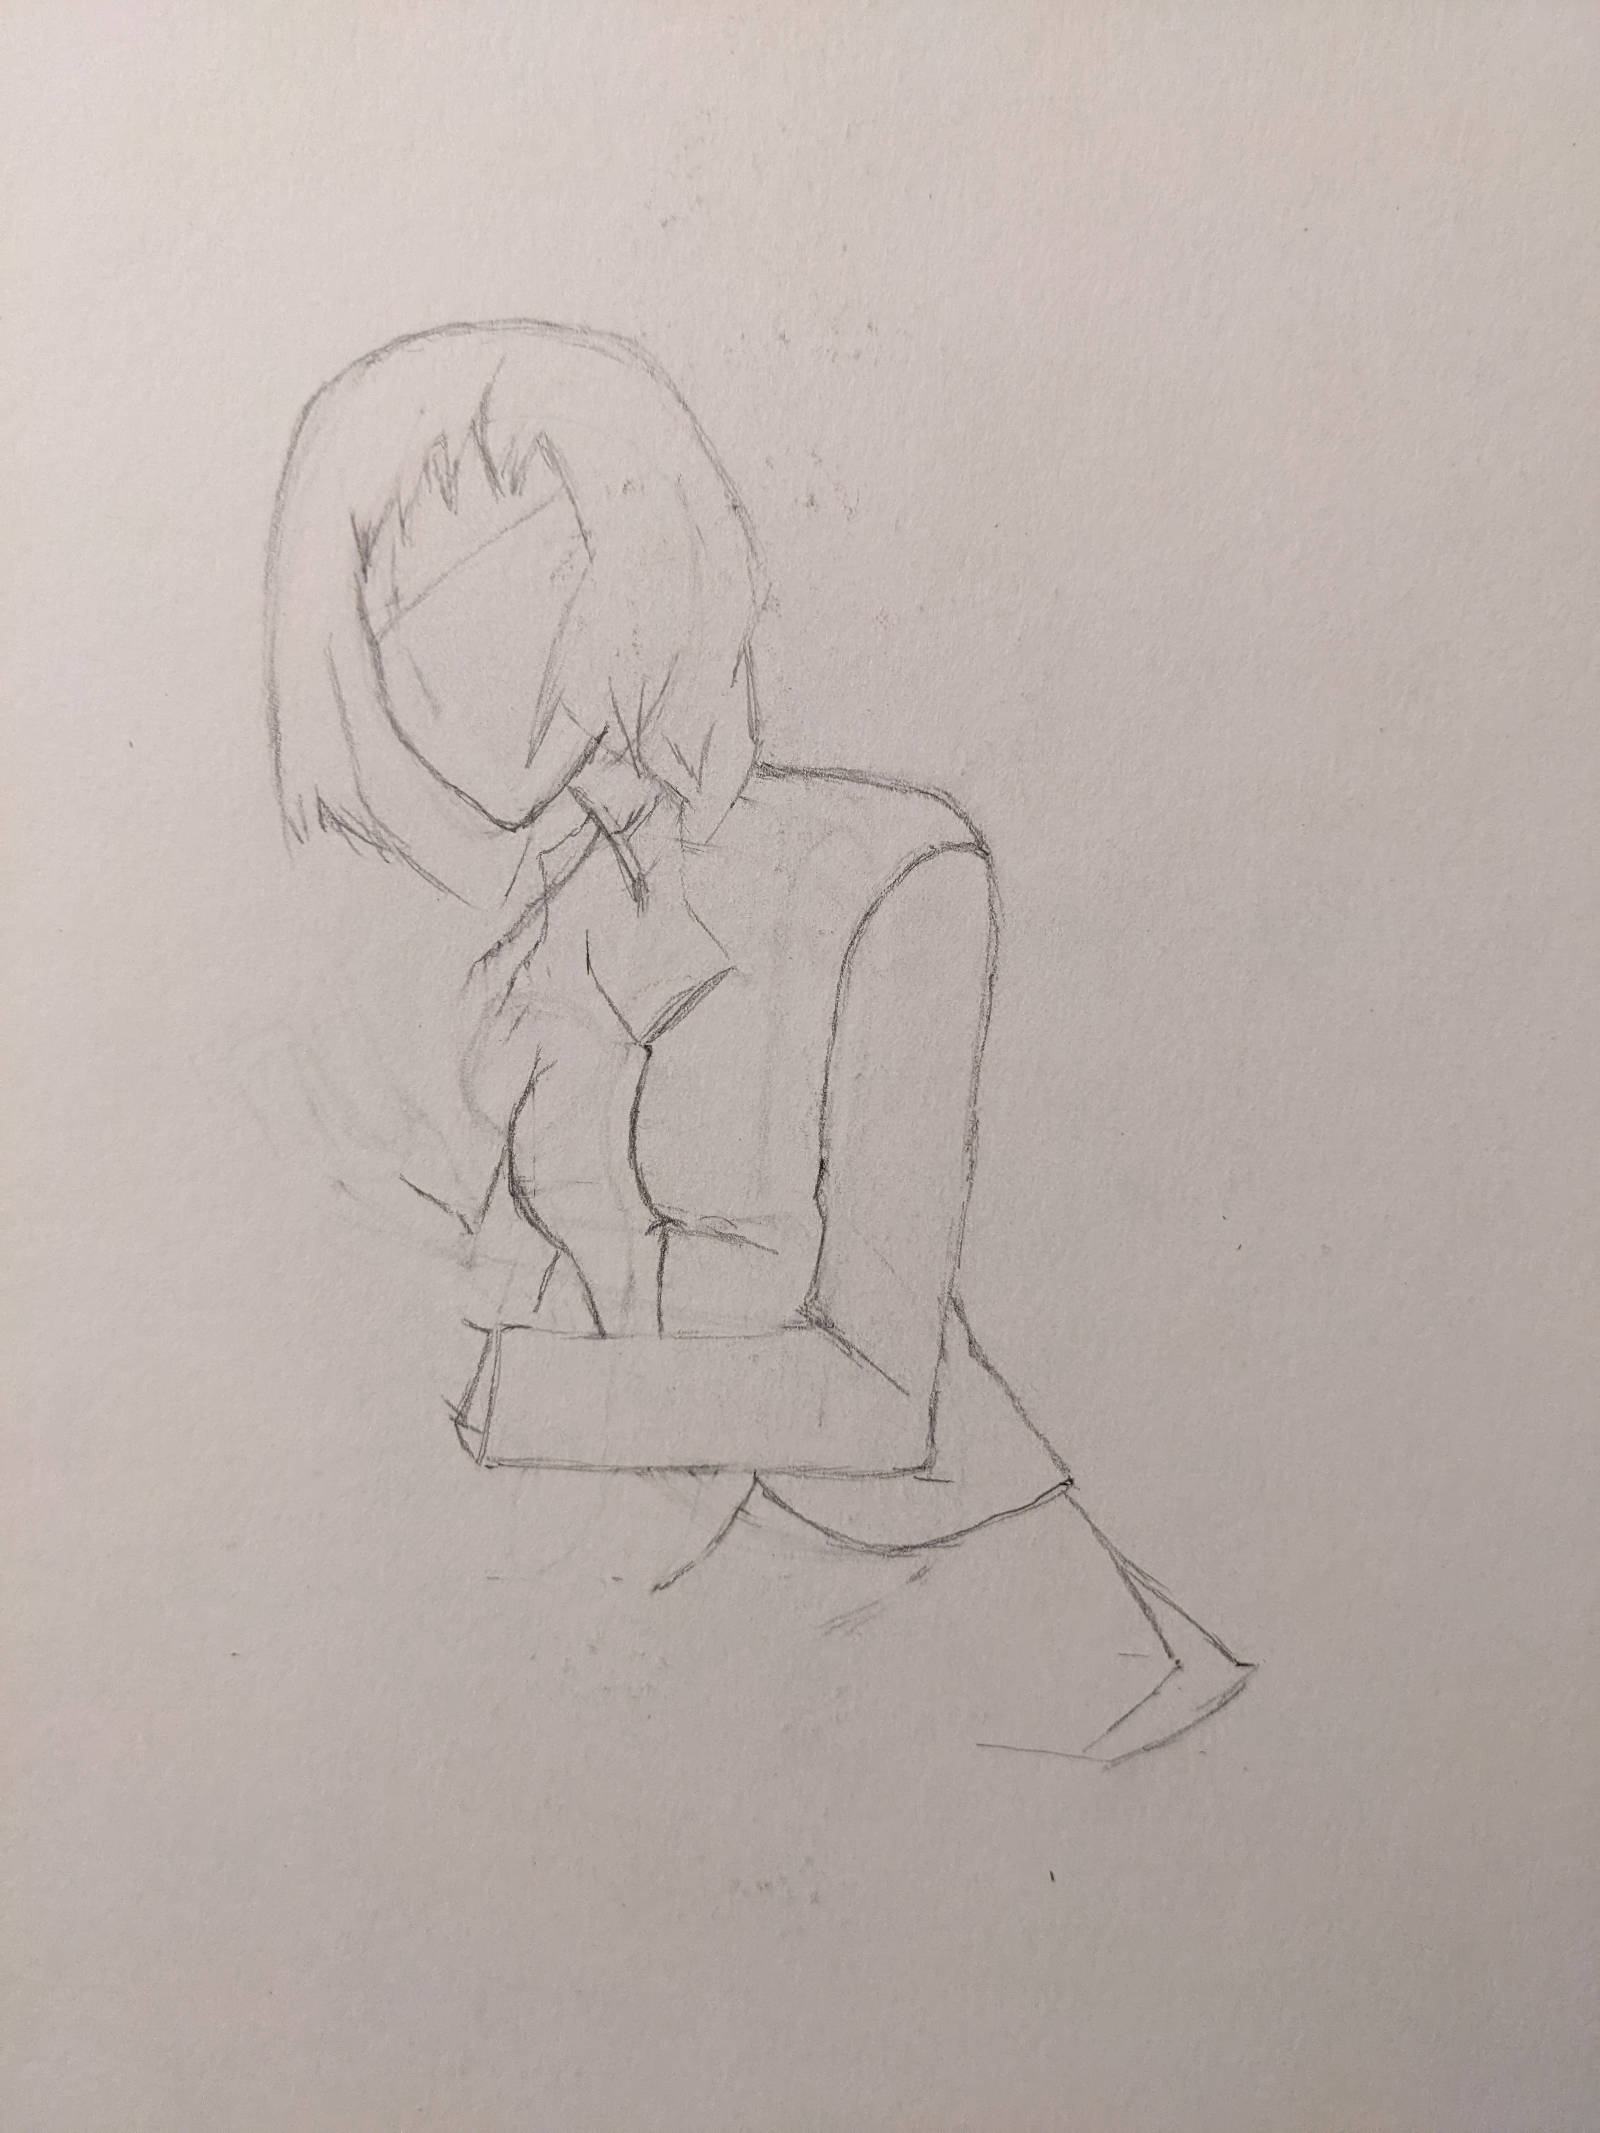 Initial rough sketch of a girl sitting.